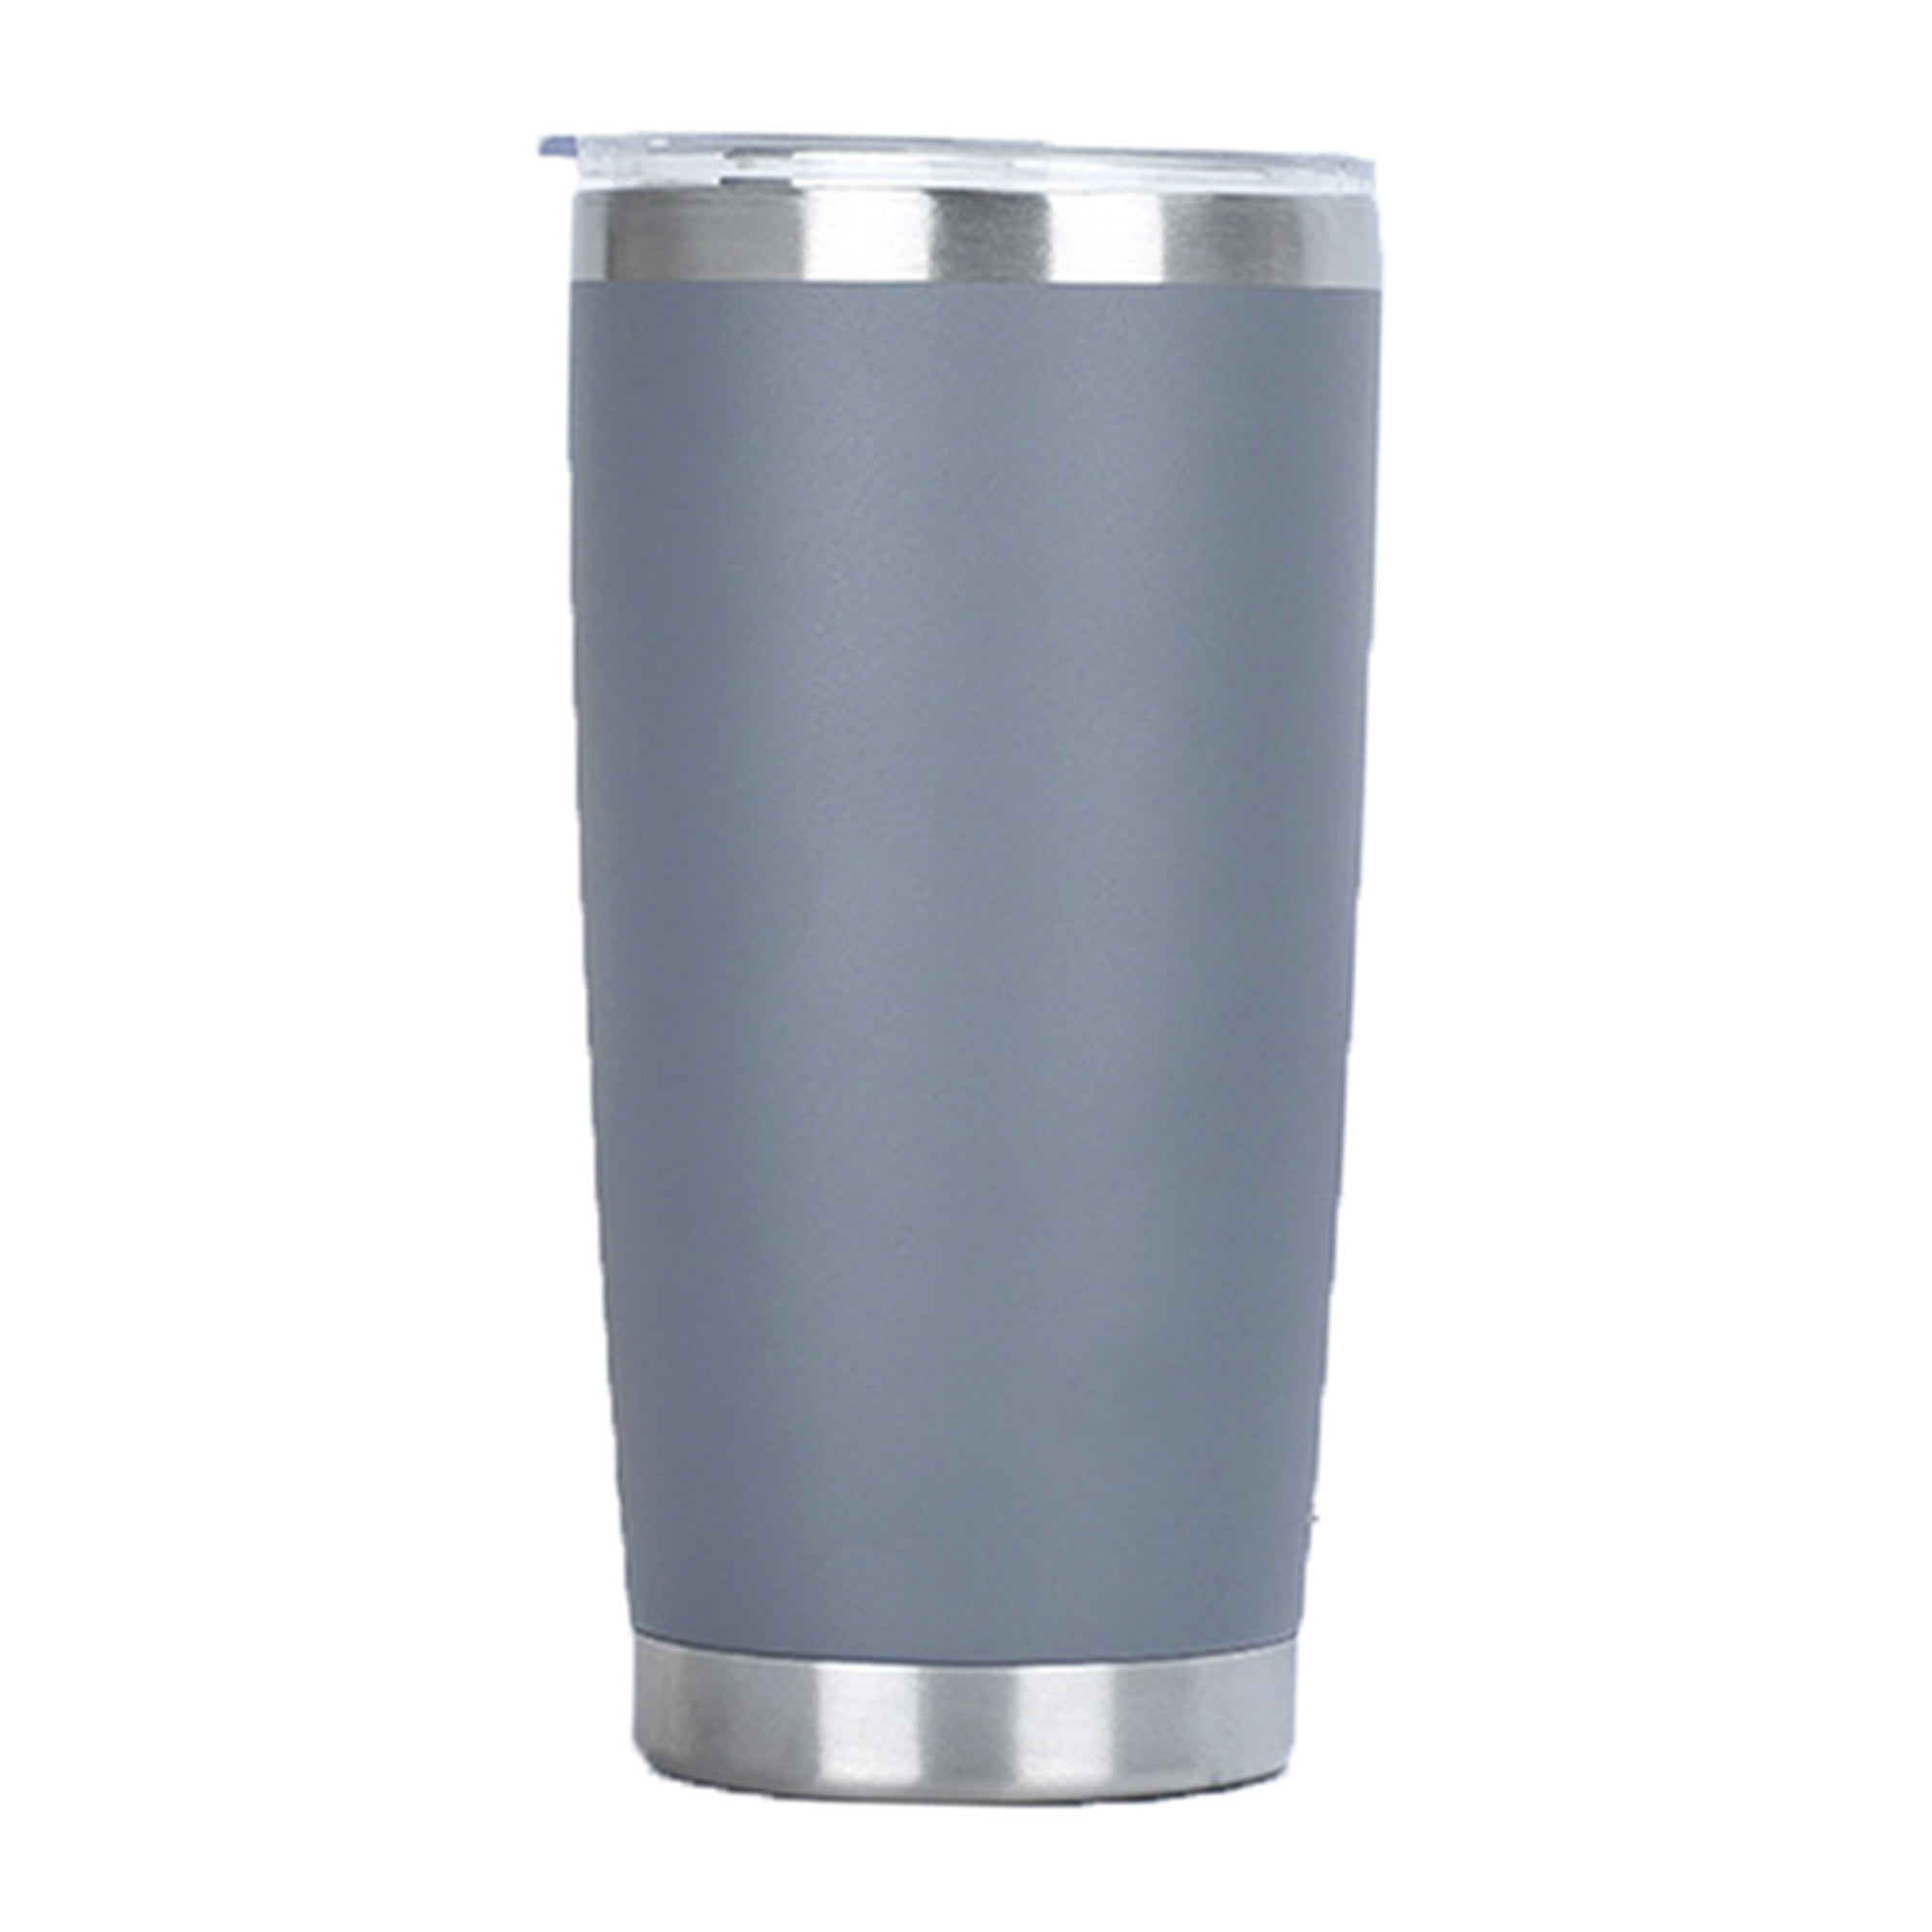 Sivaphe Insulated Tumbler Stainless Steel 12 fl.oz Hot and Cold Drinking  Cup Double Wall Thermal Tra…See more Sivaphe Insulated Tumbler Stainless